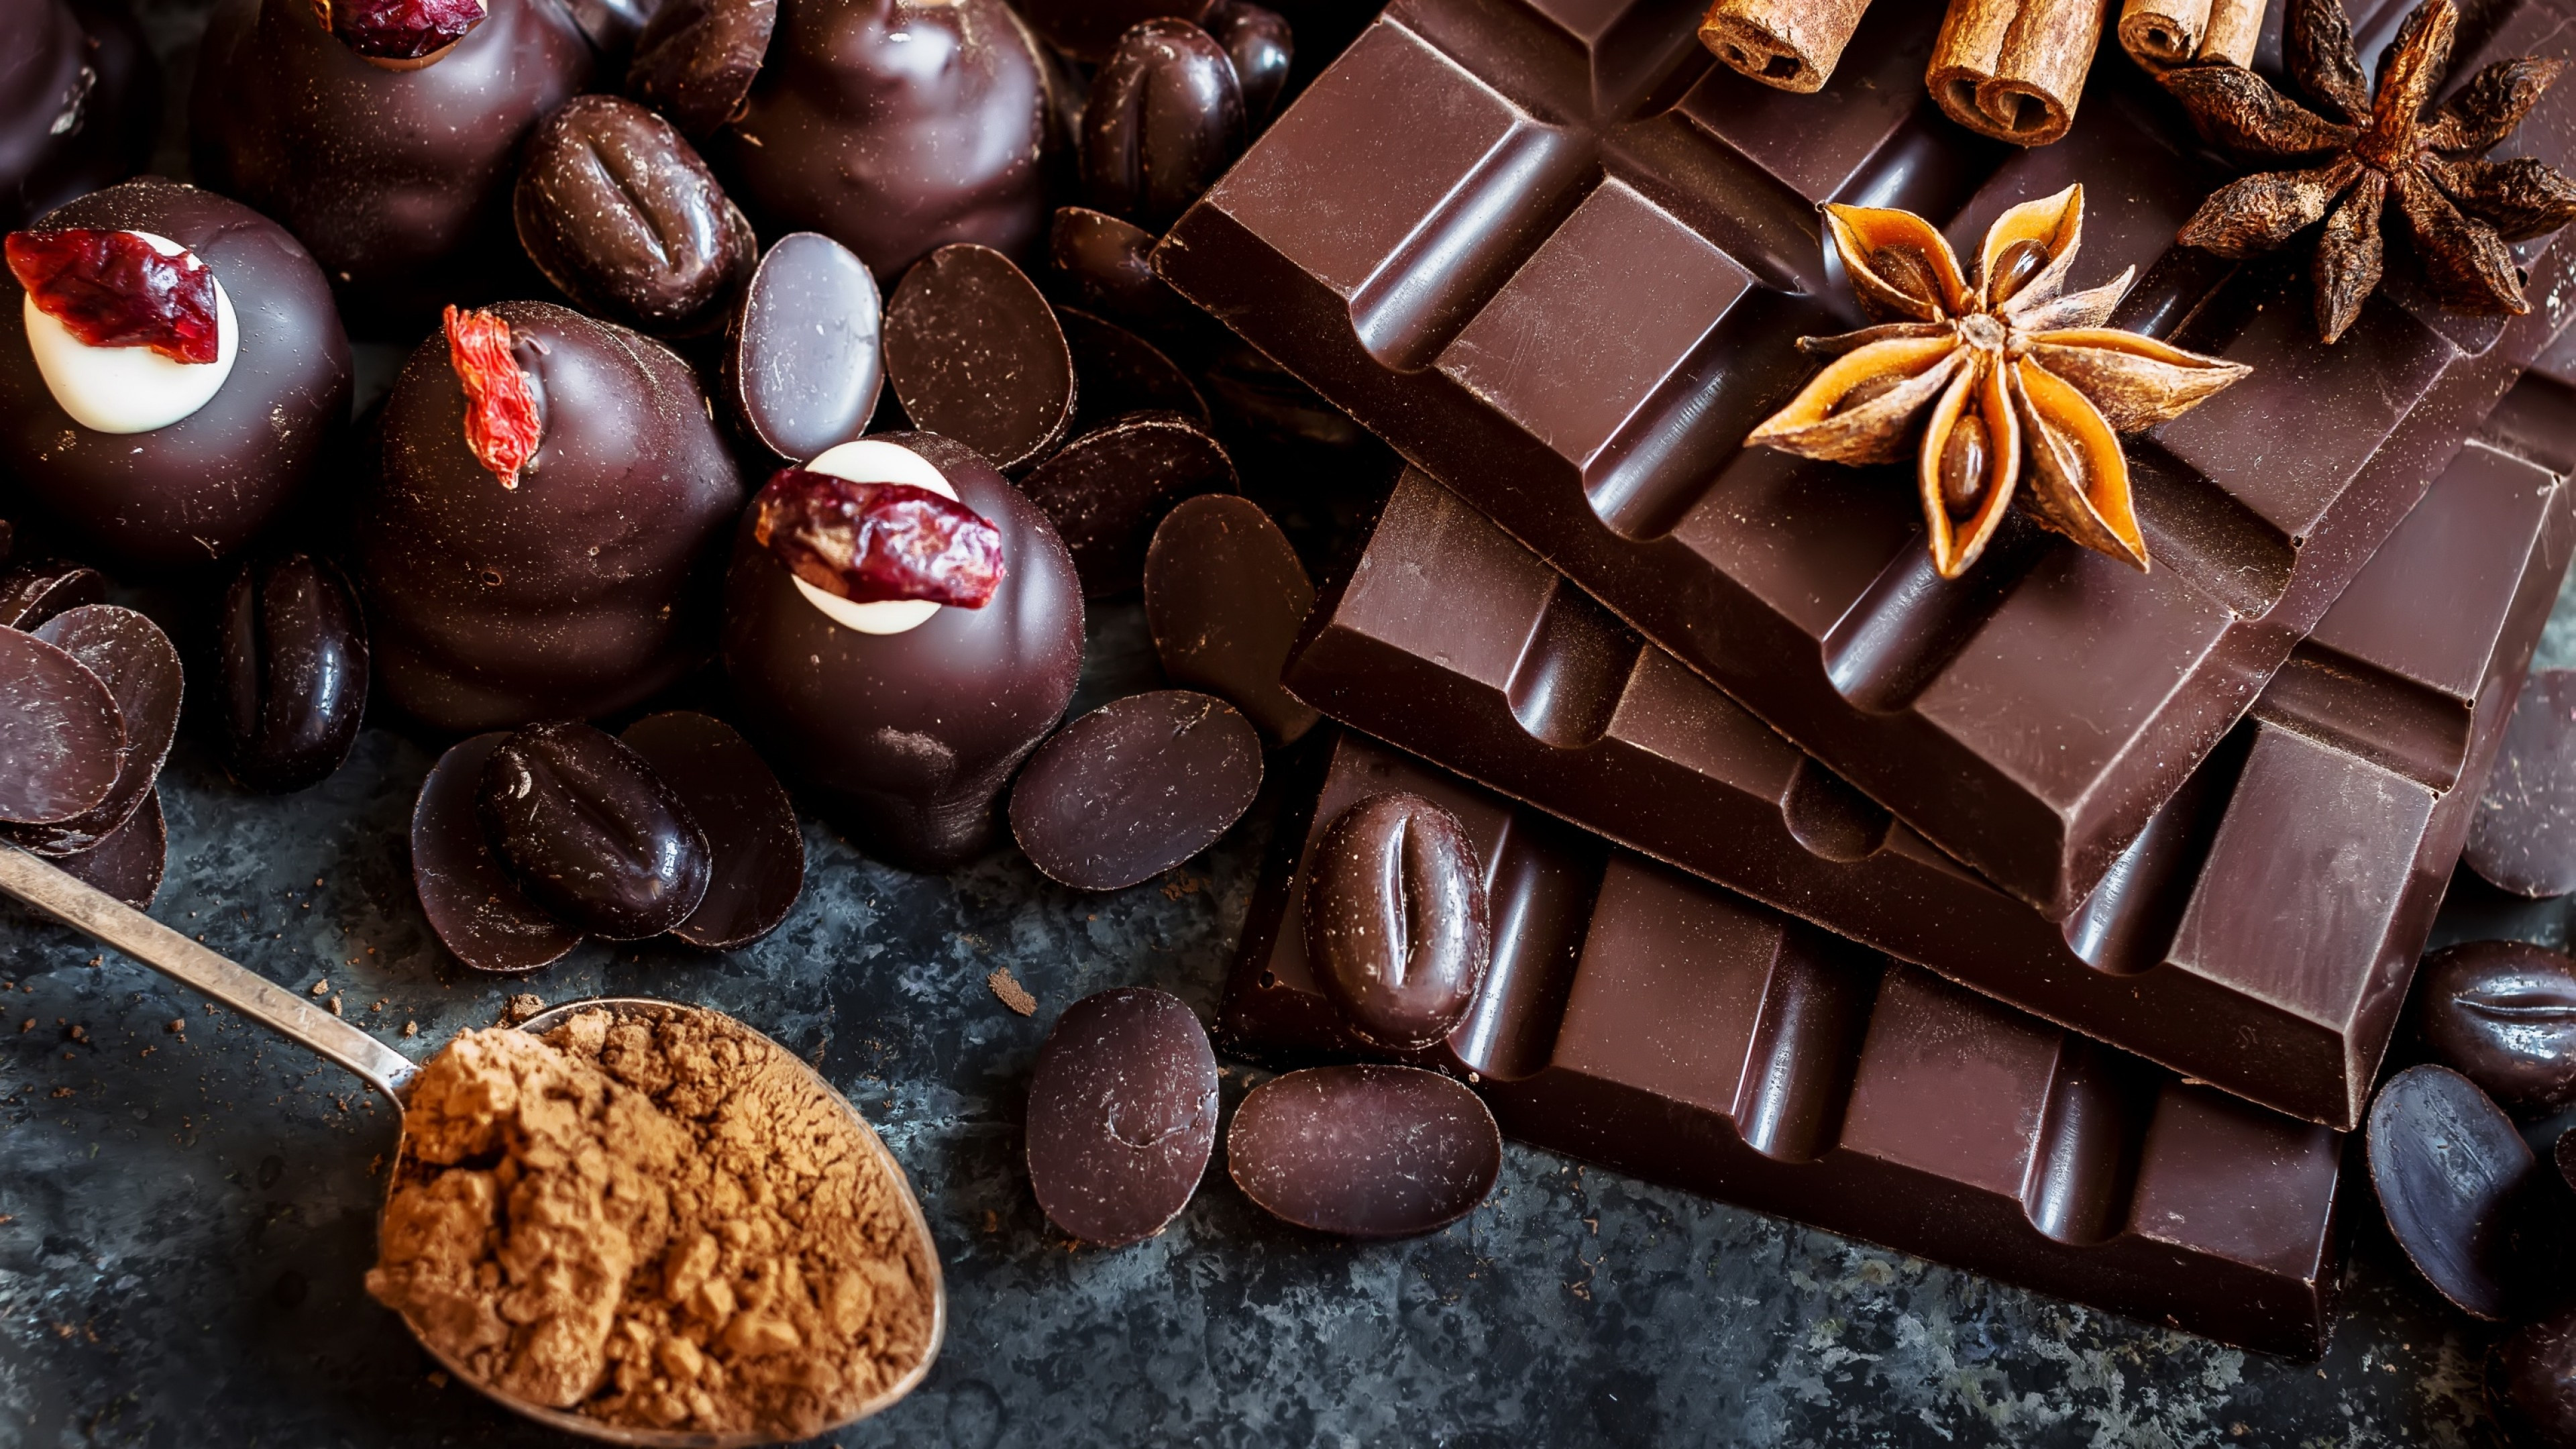 Chocolate: Food product made from cocoa beans, Consumed as candy. 3840x2160 4K Wallpaper.